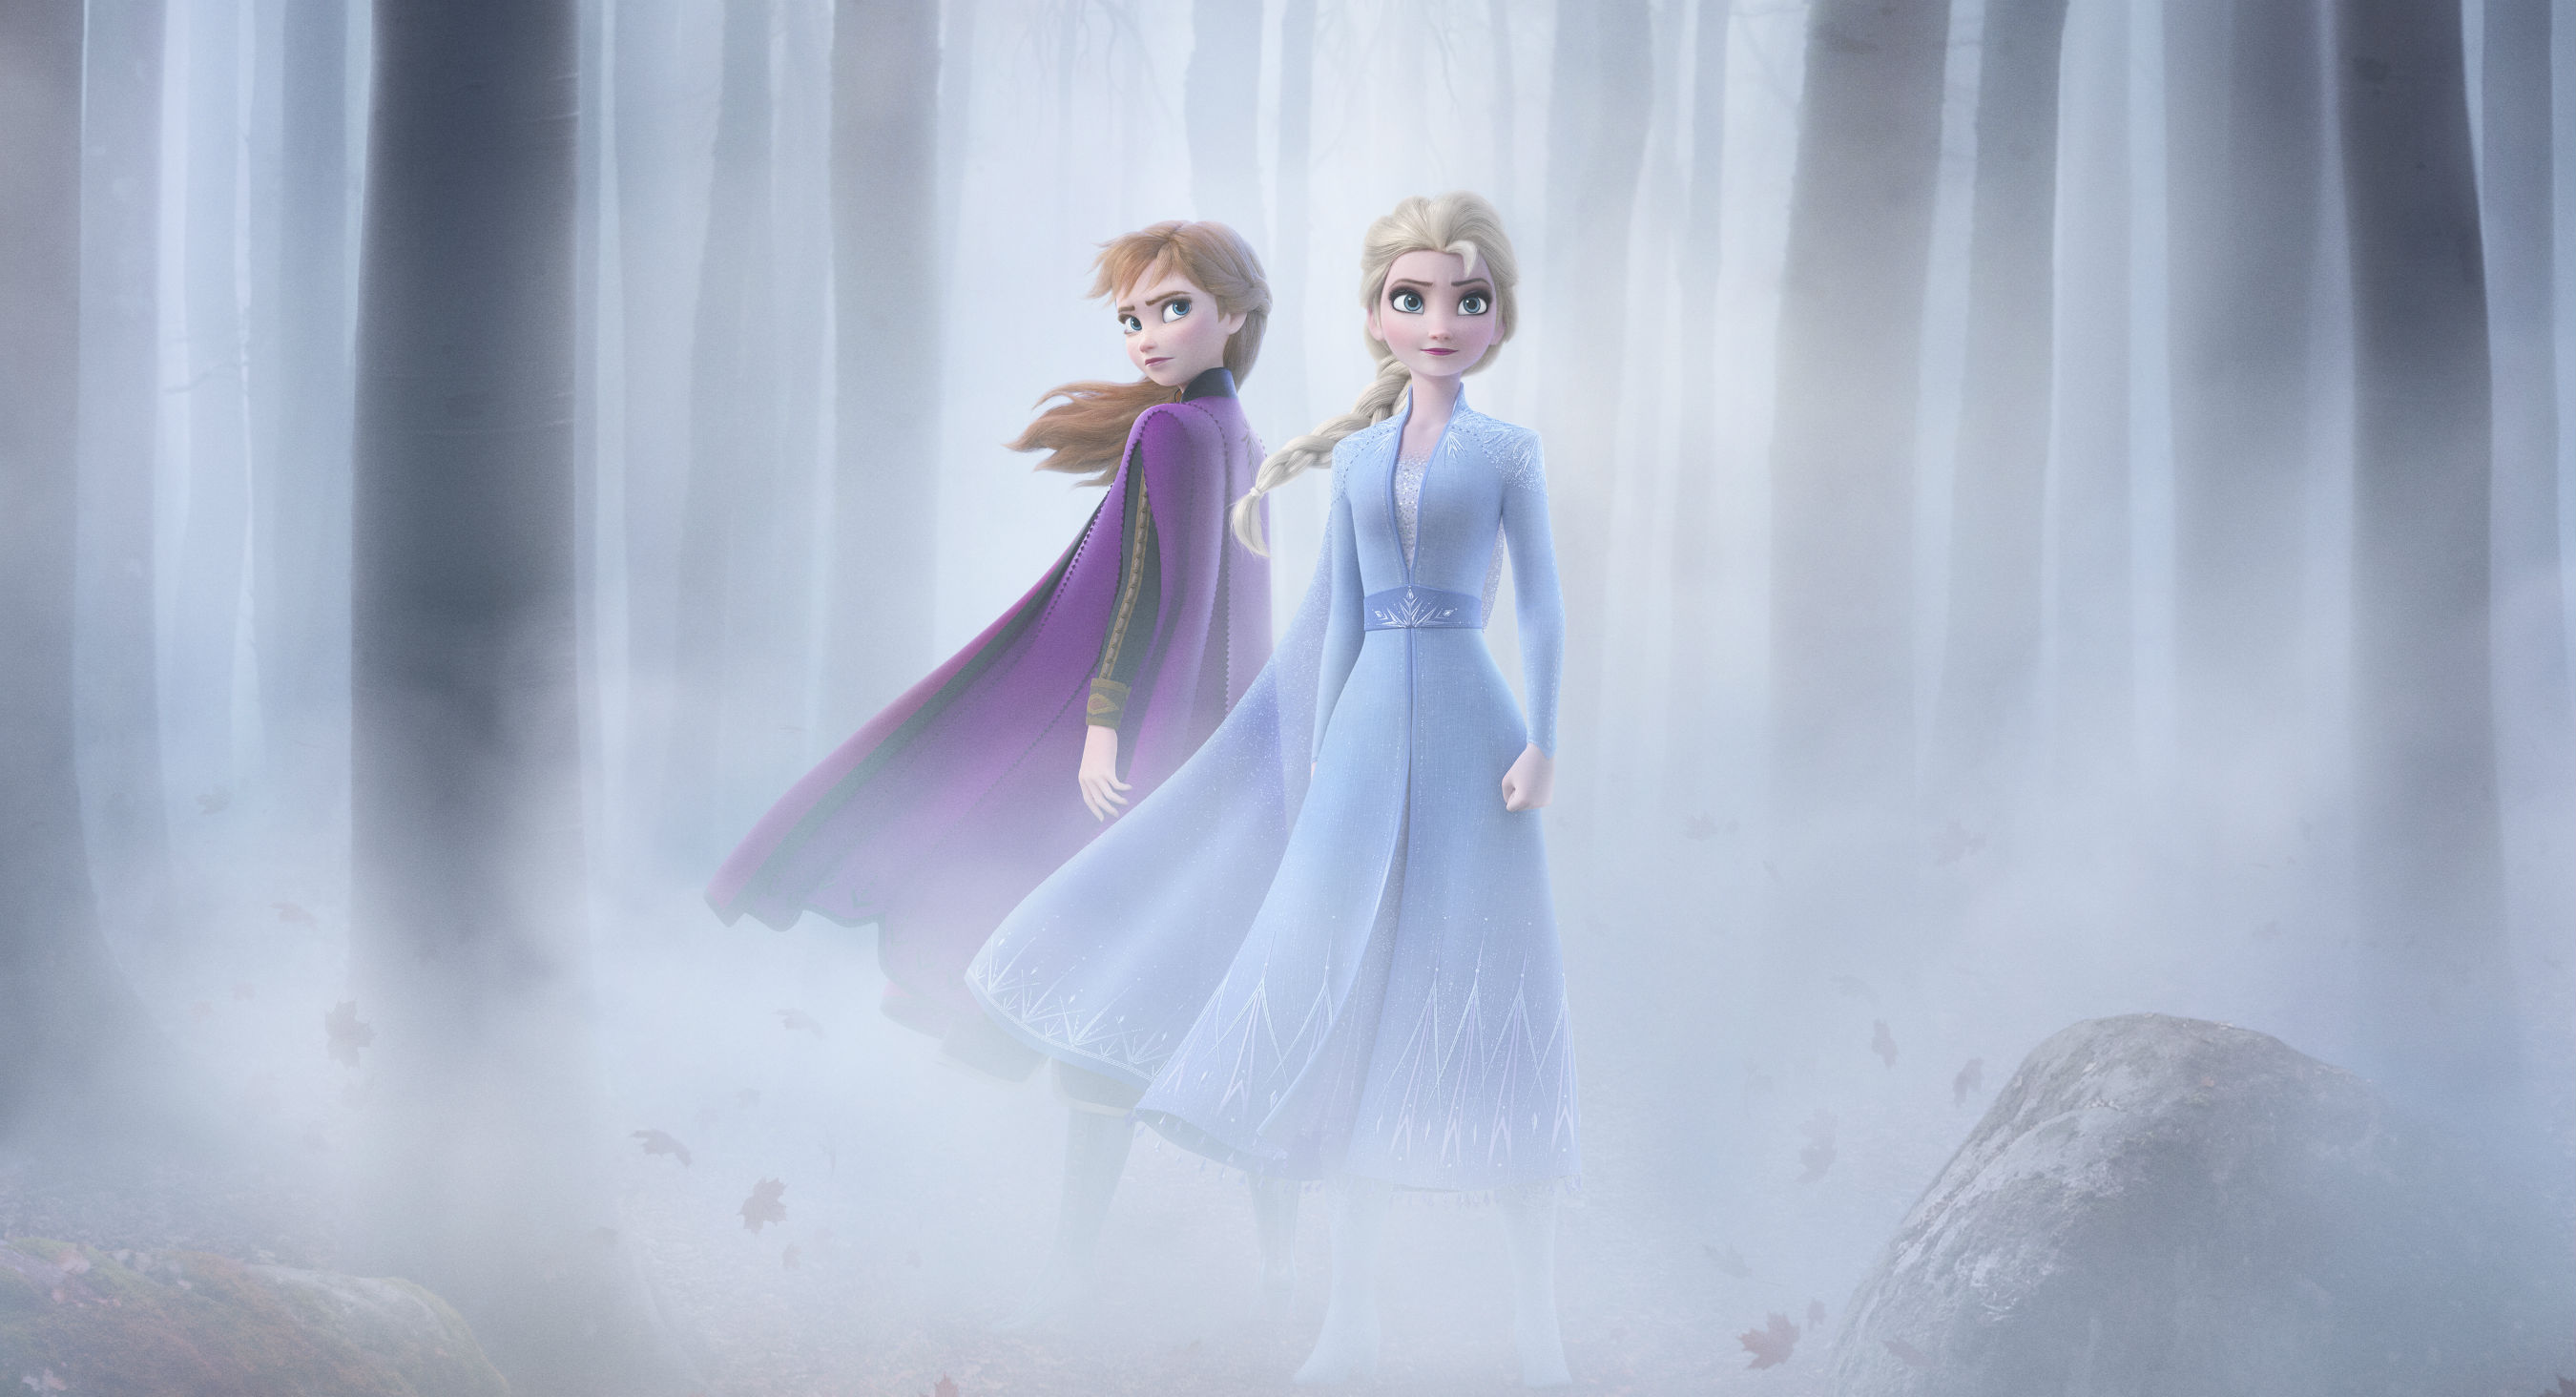 Frozen 2 Looking To Oust Toy Story 4 For Global Opening Weekend Record